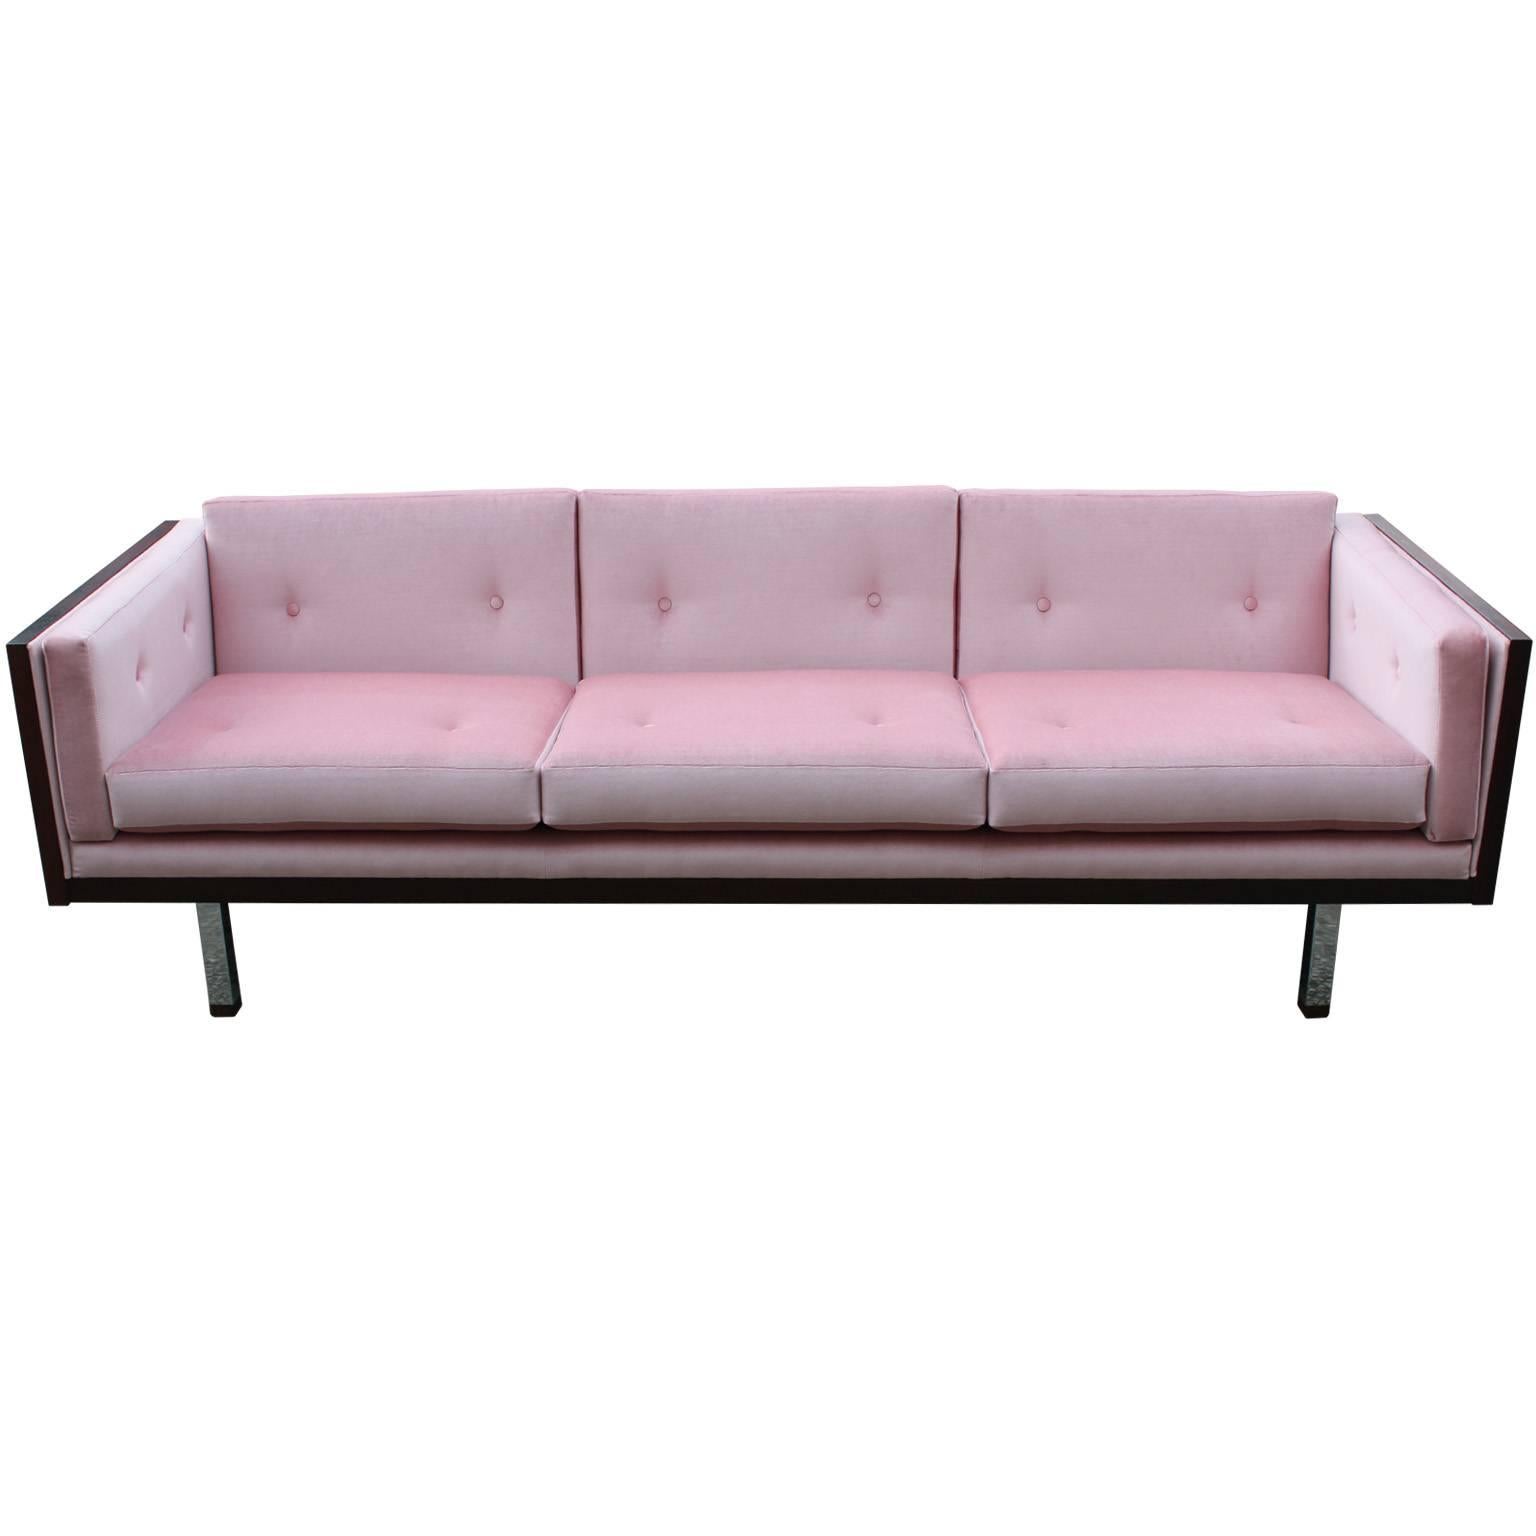 Stunning rosewood case sofa attributed Milo Baughman for Thayer Coggin. Rosewood veneer has beautiful graining. Sofa is freshly upholstered in a buttoned silky pink velvet. Simple chrome legs finish the sofa.